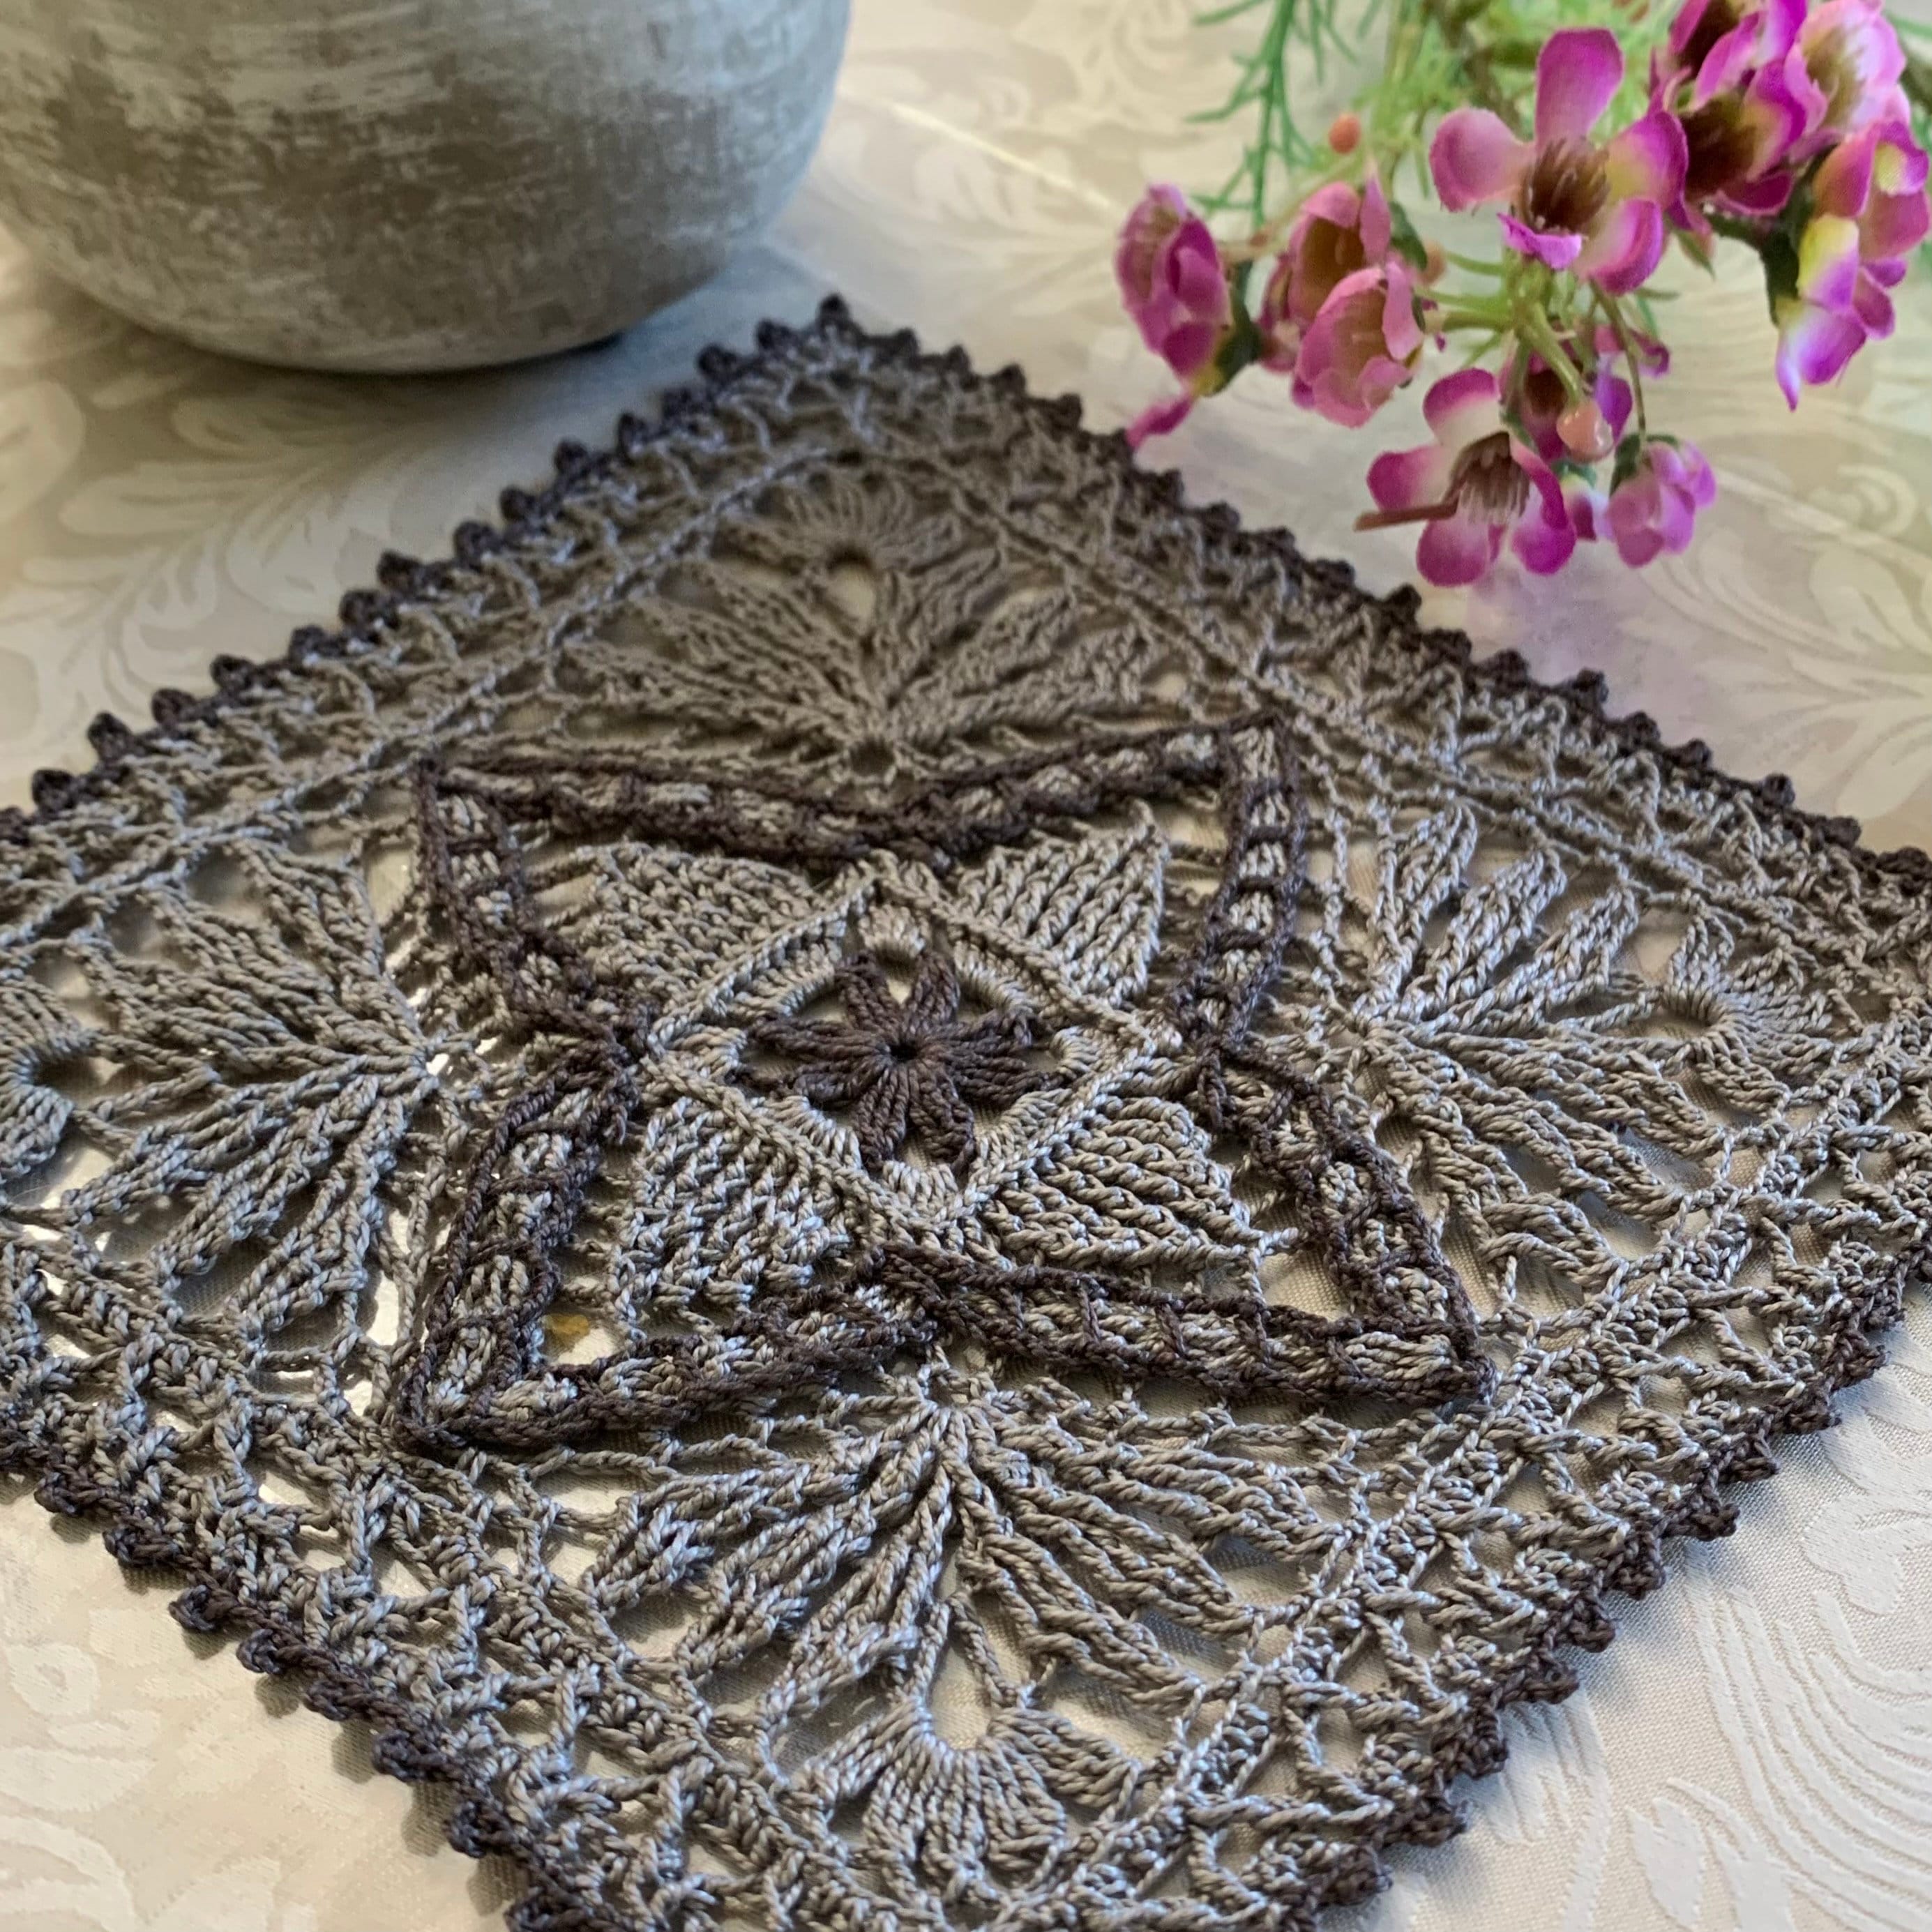 8” Square Crochet Doily-Light Gray with Charcoal Gray Accents